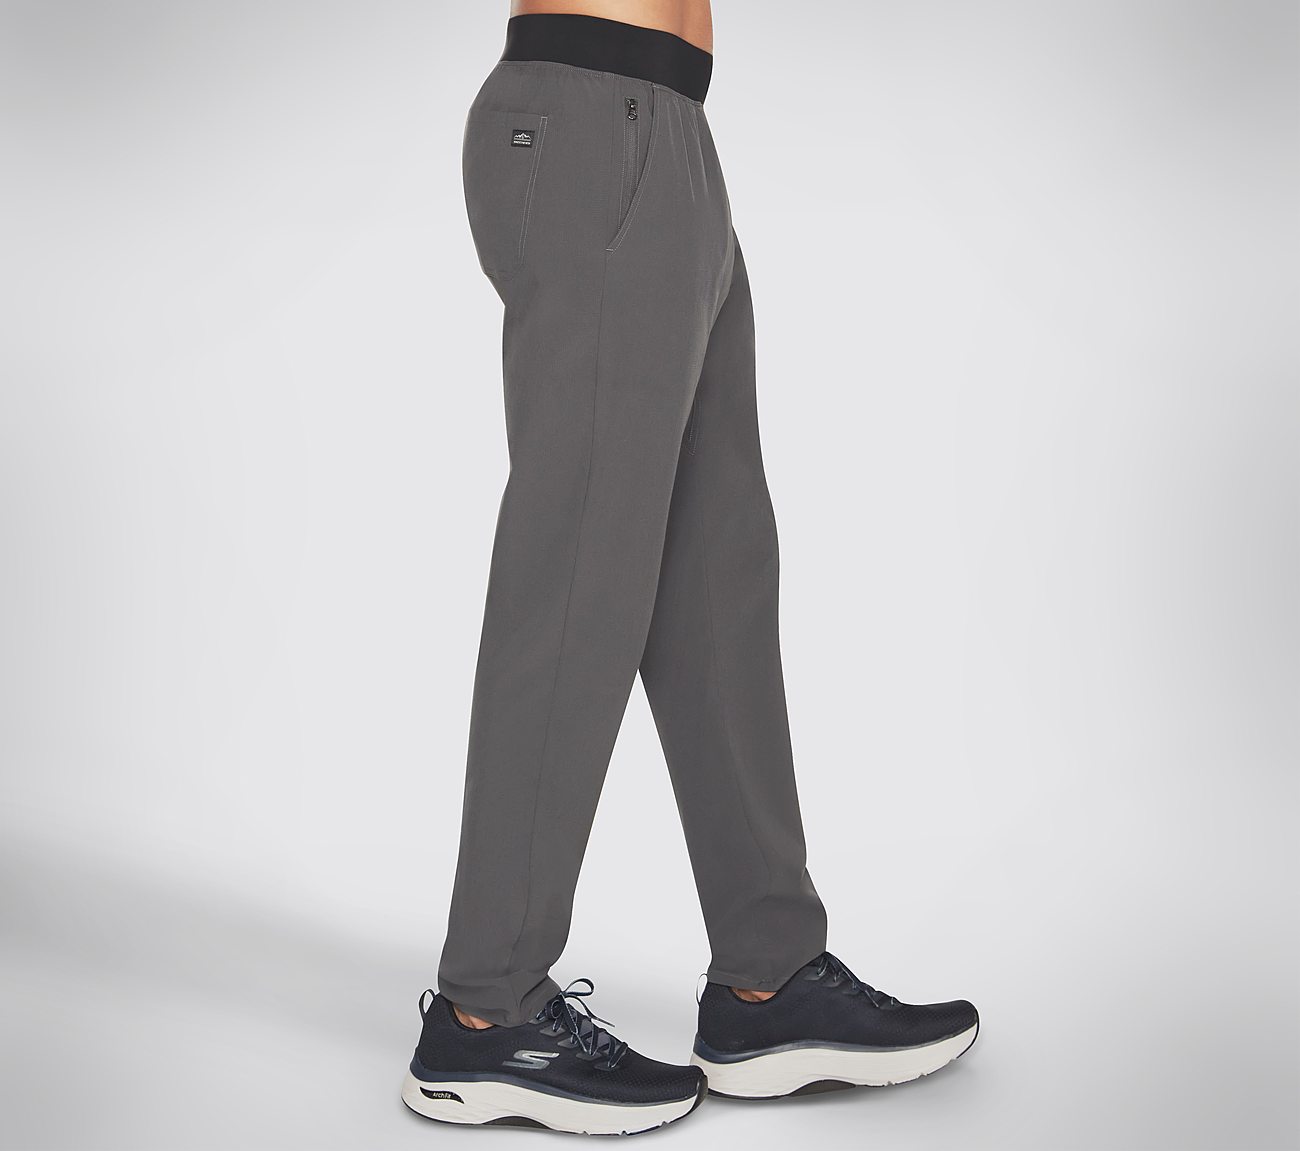 THE GOWALK PANT TEARSTOP, BLACK/CHARCOAL Apparels Bottom View